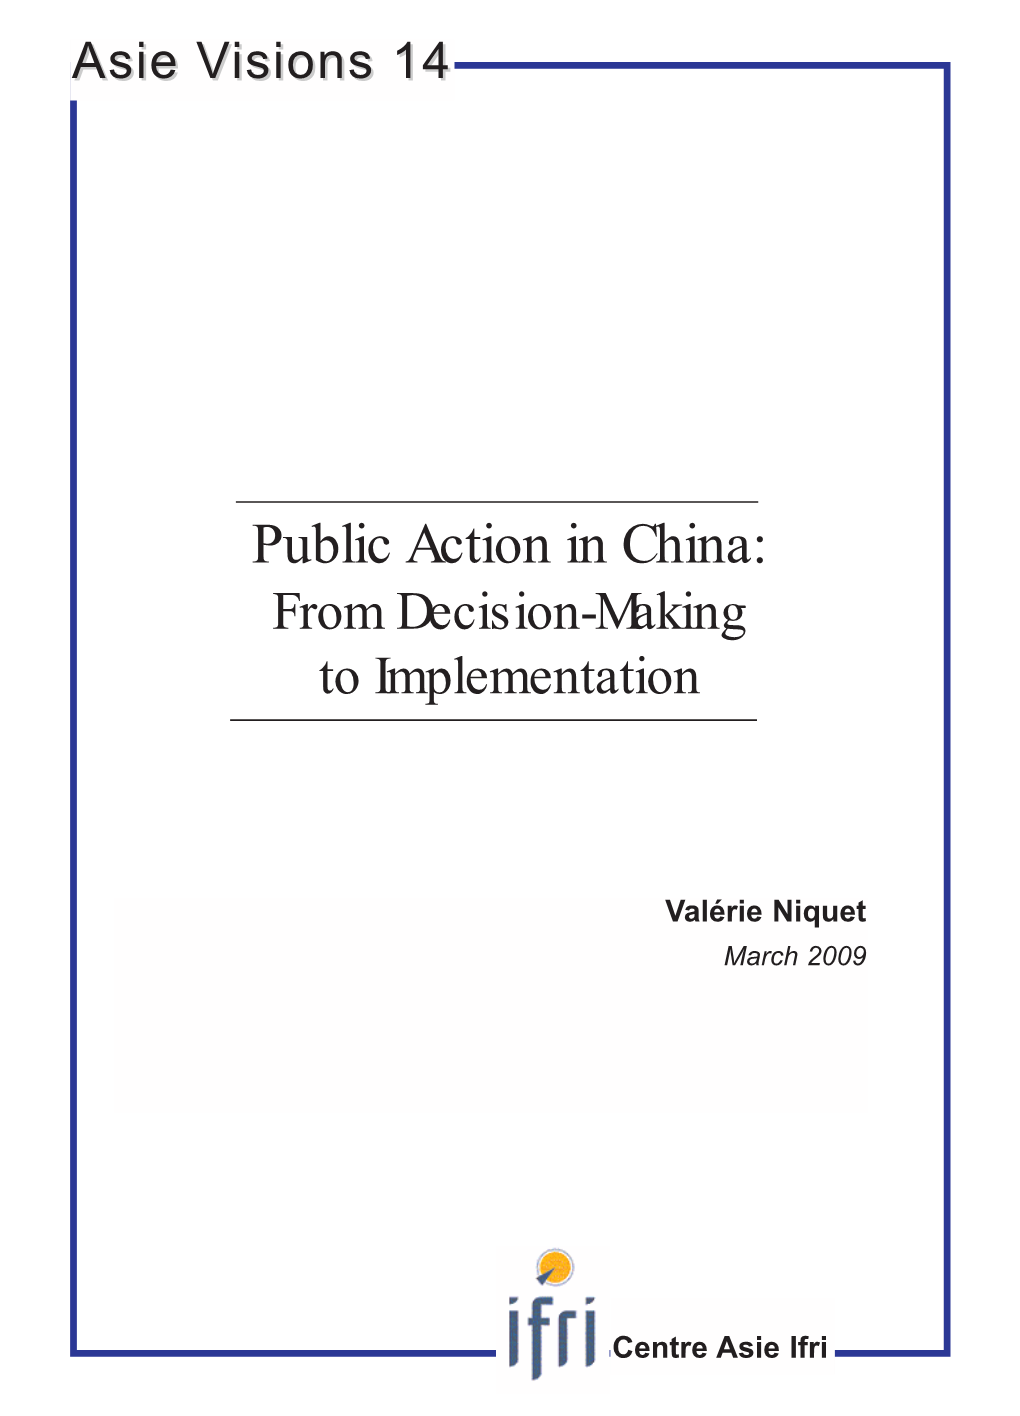 Public Action in China: from Decision-Making to Implementation